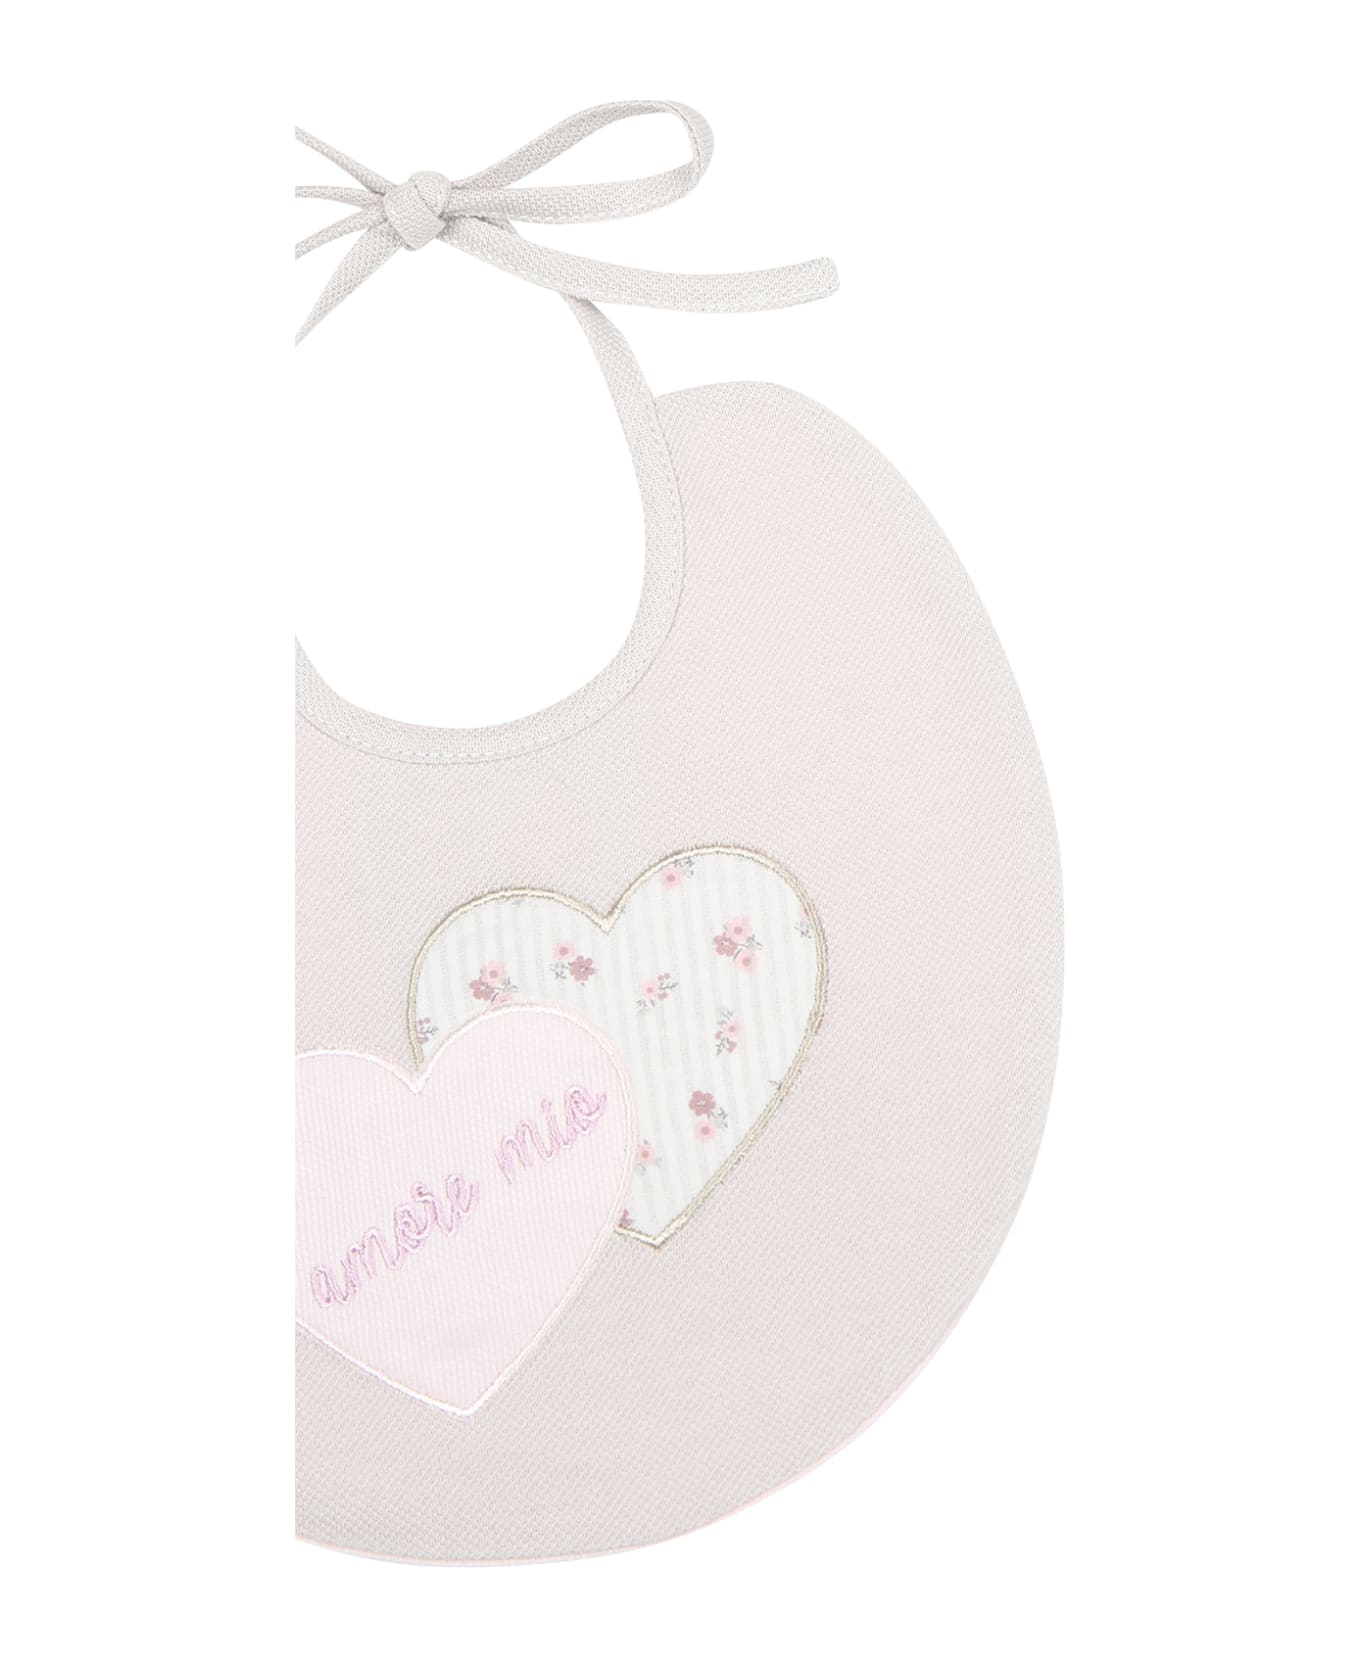 La stupenderia Beige Bib For Baby Girl With Hearts And Writing - Beige